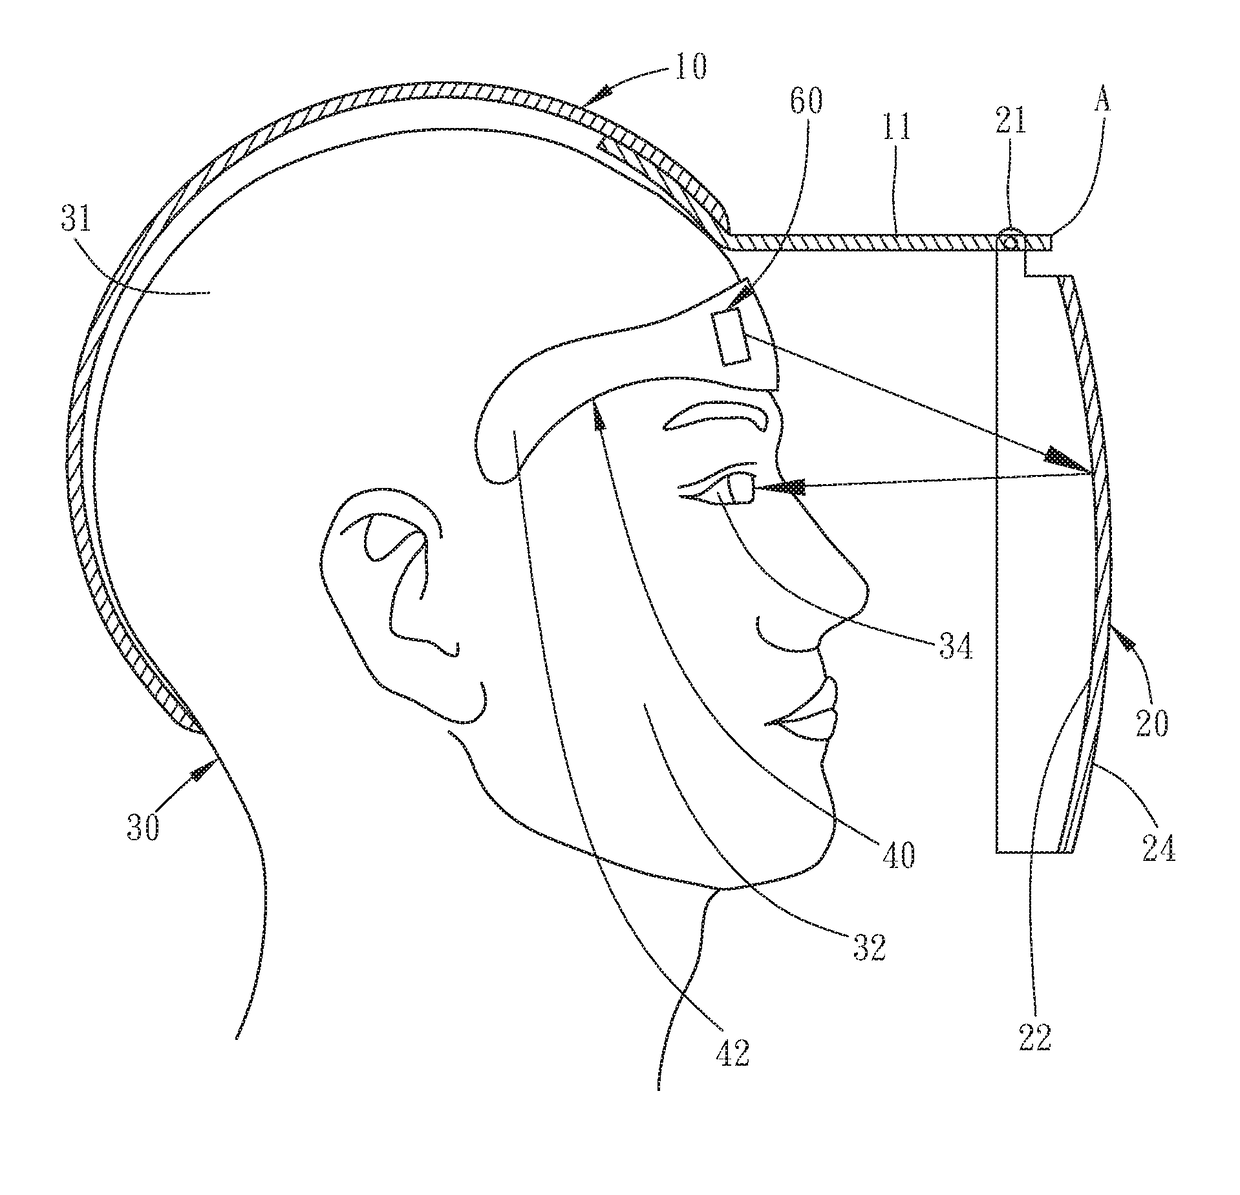 Head-mounted equipment capable of displaying images